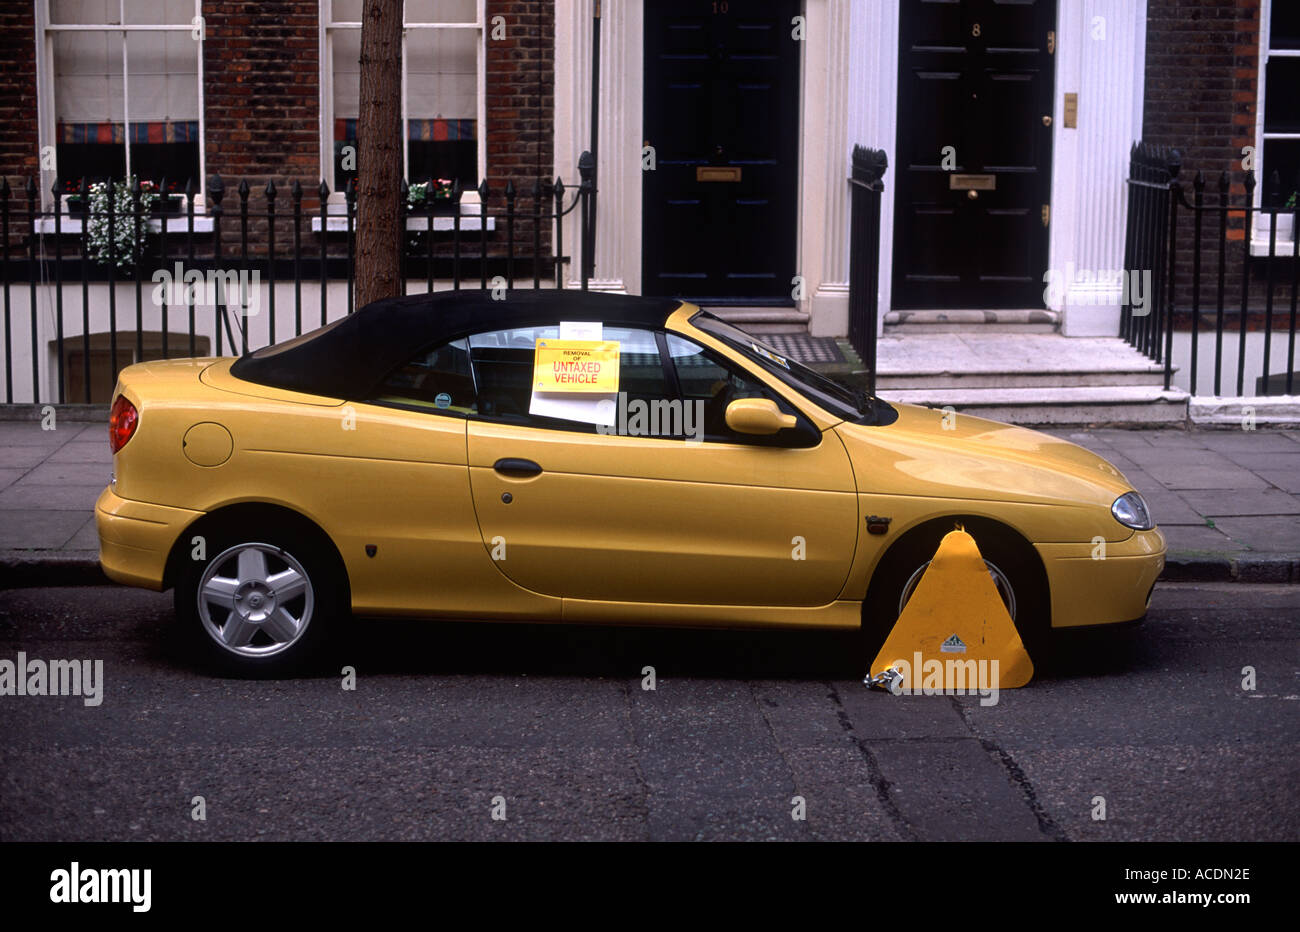 Yellow sports car clamped on residential street, Camden, London. Sign on car window reads: 'Removal of Untaxed Vehicle'. Stock Photo